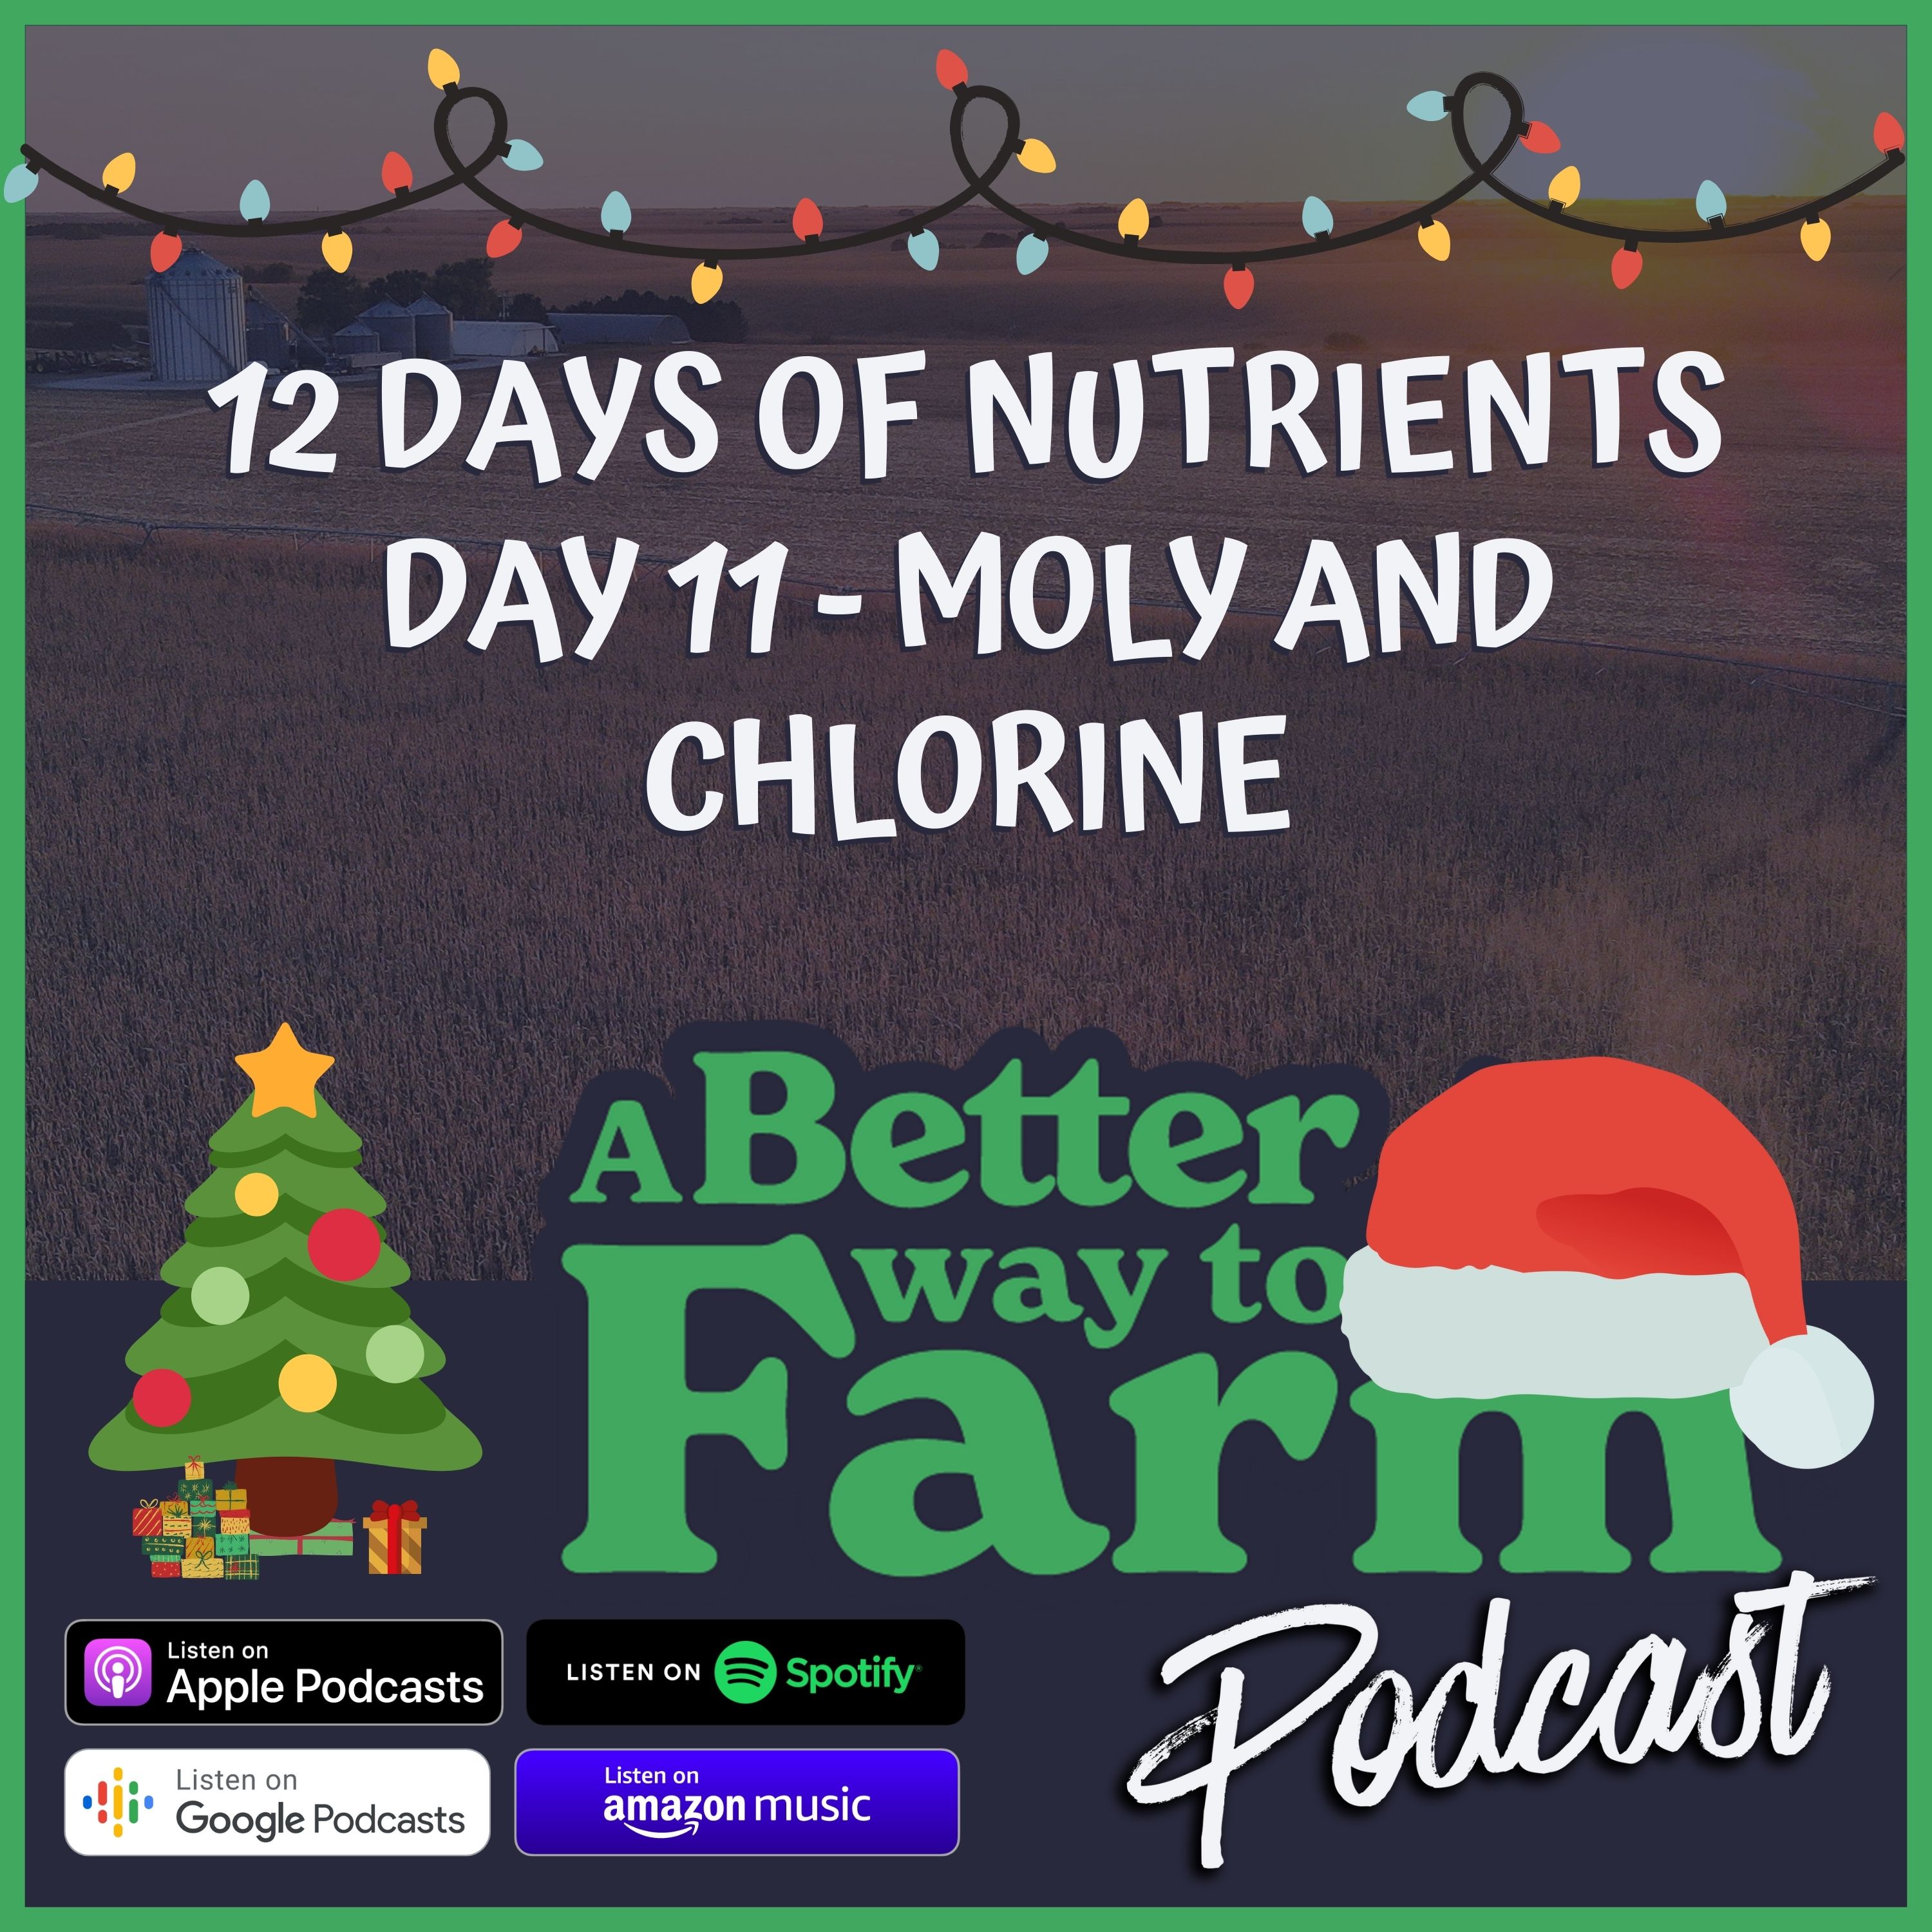 224: 12 Days of Nutrients - Day 11 Moly and Chlorine